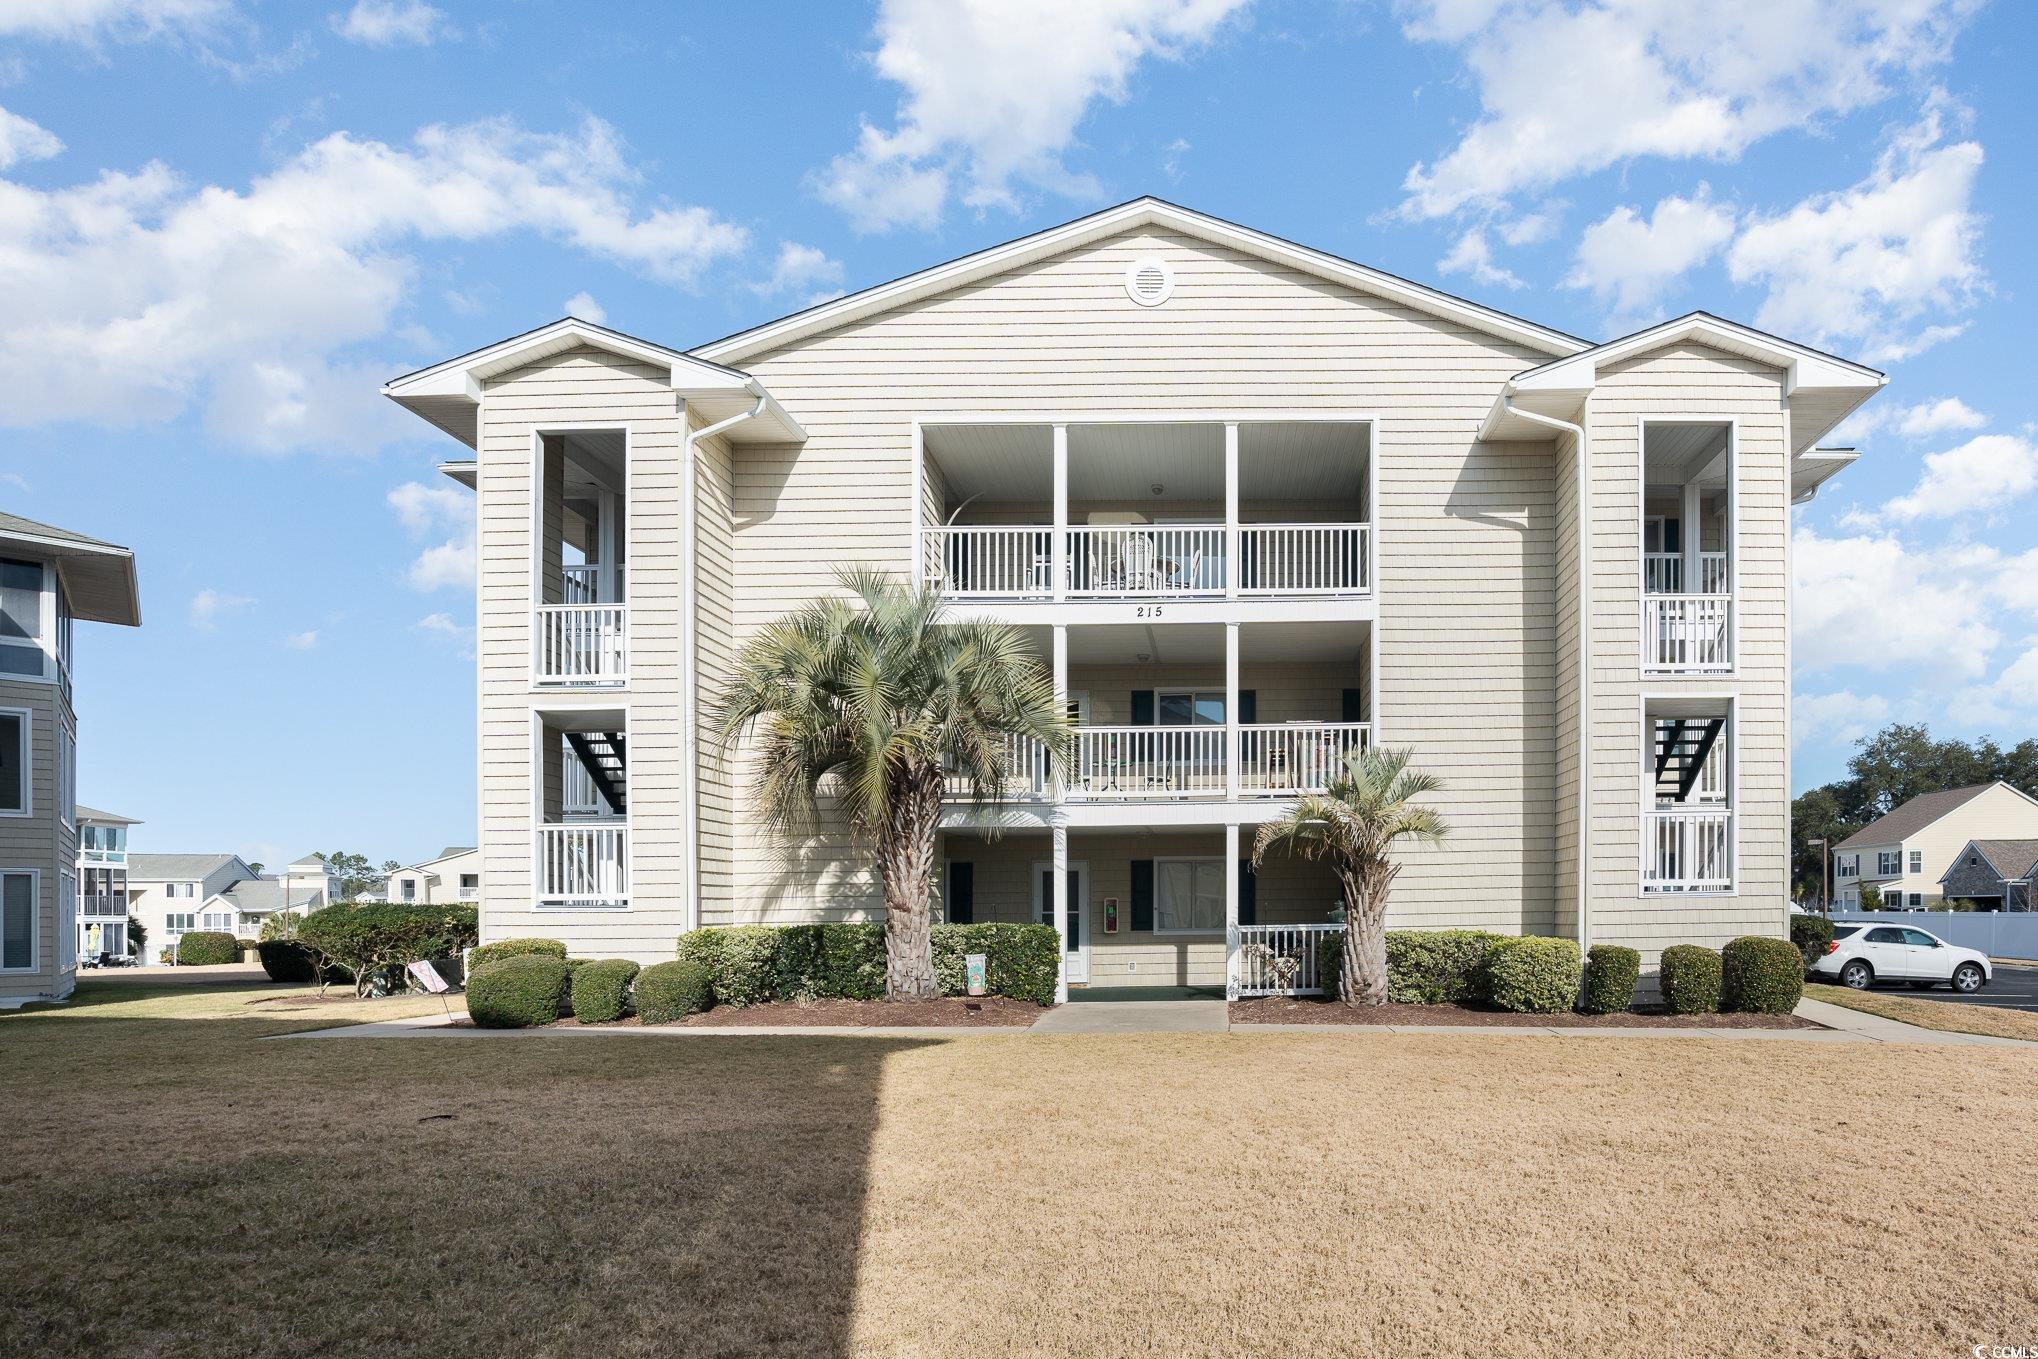 welcome to your dream coastal living! this beautiful top-floor condo is in the fantastic gated community of waterway landing located along the intracoastal waterway. this meticulously maintained end unit has upgraded luxury vinyl plank throughout and has been freshly painted. with a king, 2 twins and a pull out you can easily sleep 6. use as a rental, 2nd home or a primary residence. enjoy the screened porch with new flooring overlooking the main pool and with river views. the unit comes fully furnished for effortless move-in. the vibrant community has fishing docks and it is gated for added peace of mind. there are two pools for relaxation and recreation. all of this is in the heart of north myrtle beach close to shopping, entertainment and a straight shot one mile to the beach down 2nd ave for endless seaside enjoyment.